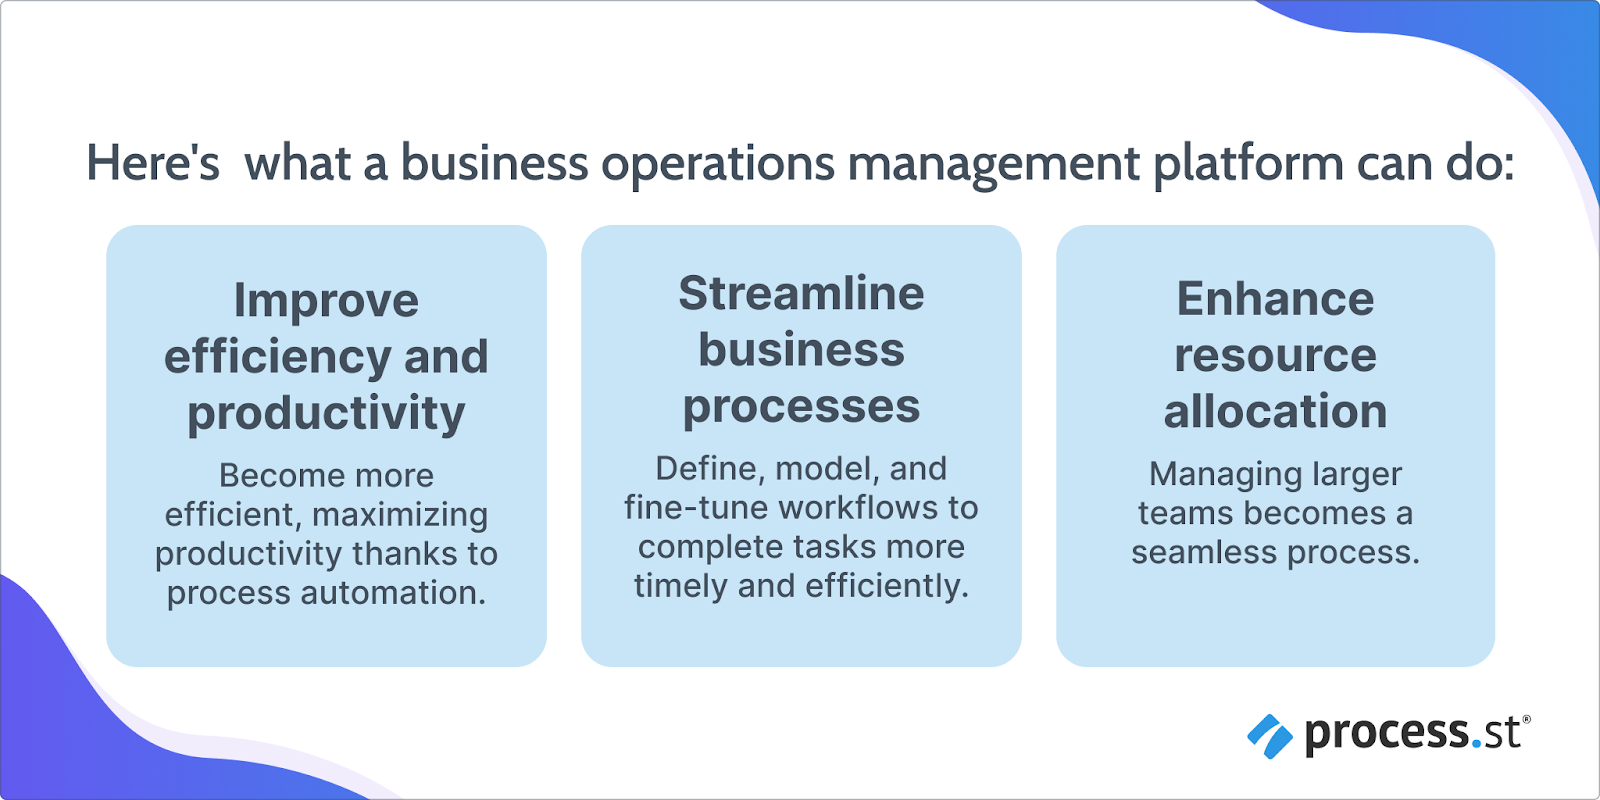 Image showing what business operations management platforms can do